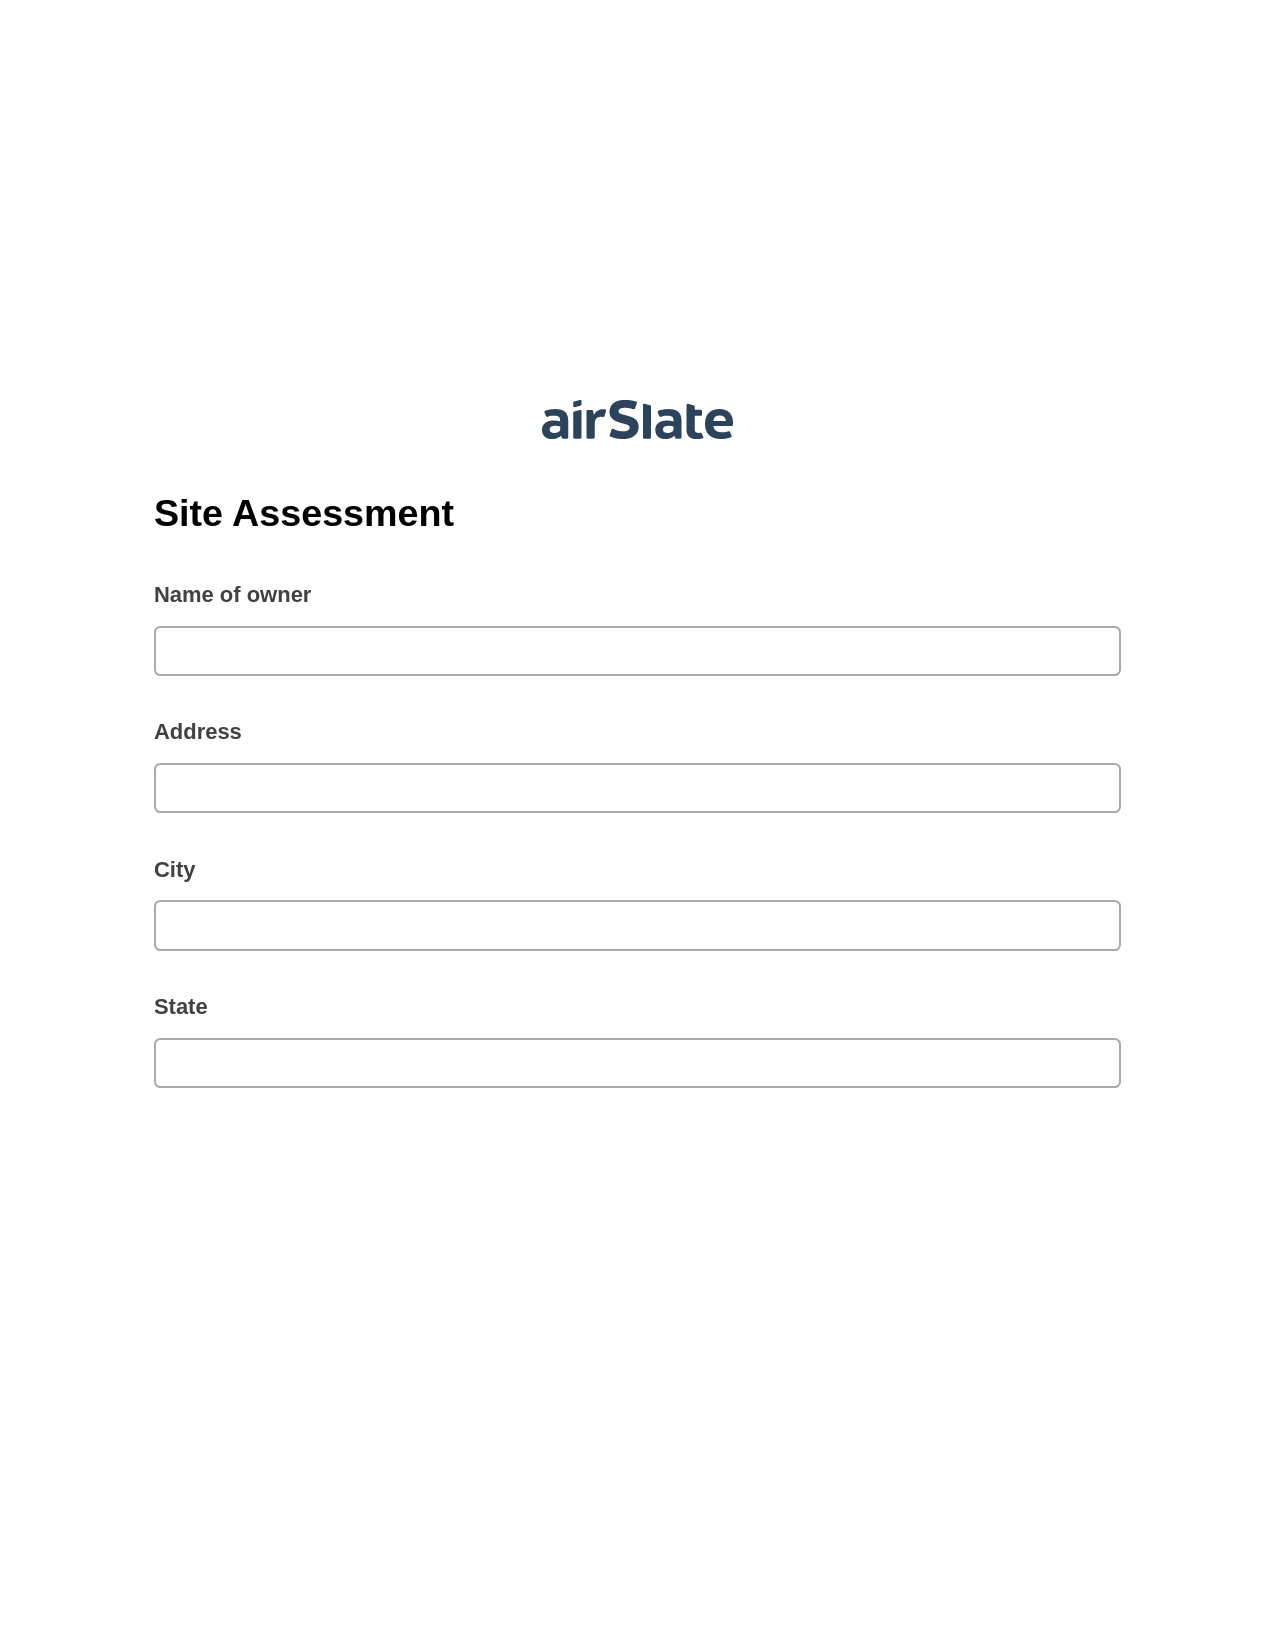 Multirole Site Assessment Pre-fill from NetSuite Records Bot, Lock the slate bot, Export to Smartsheet